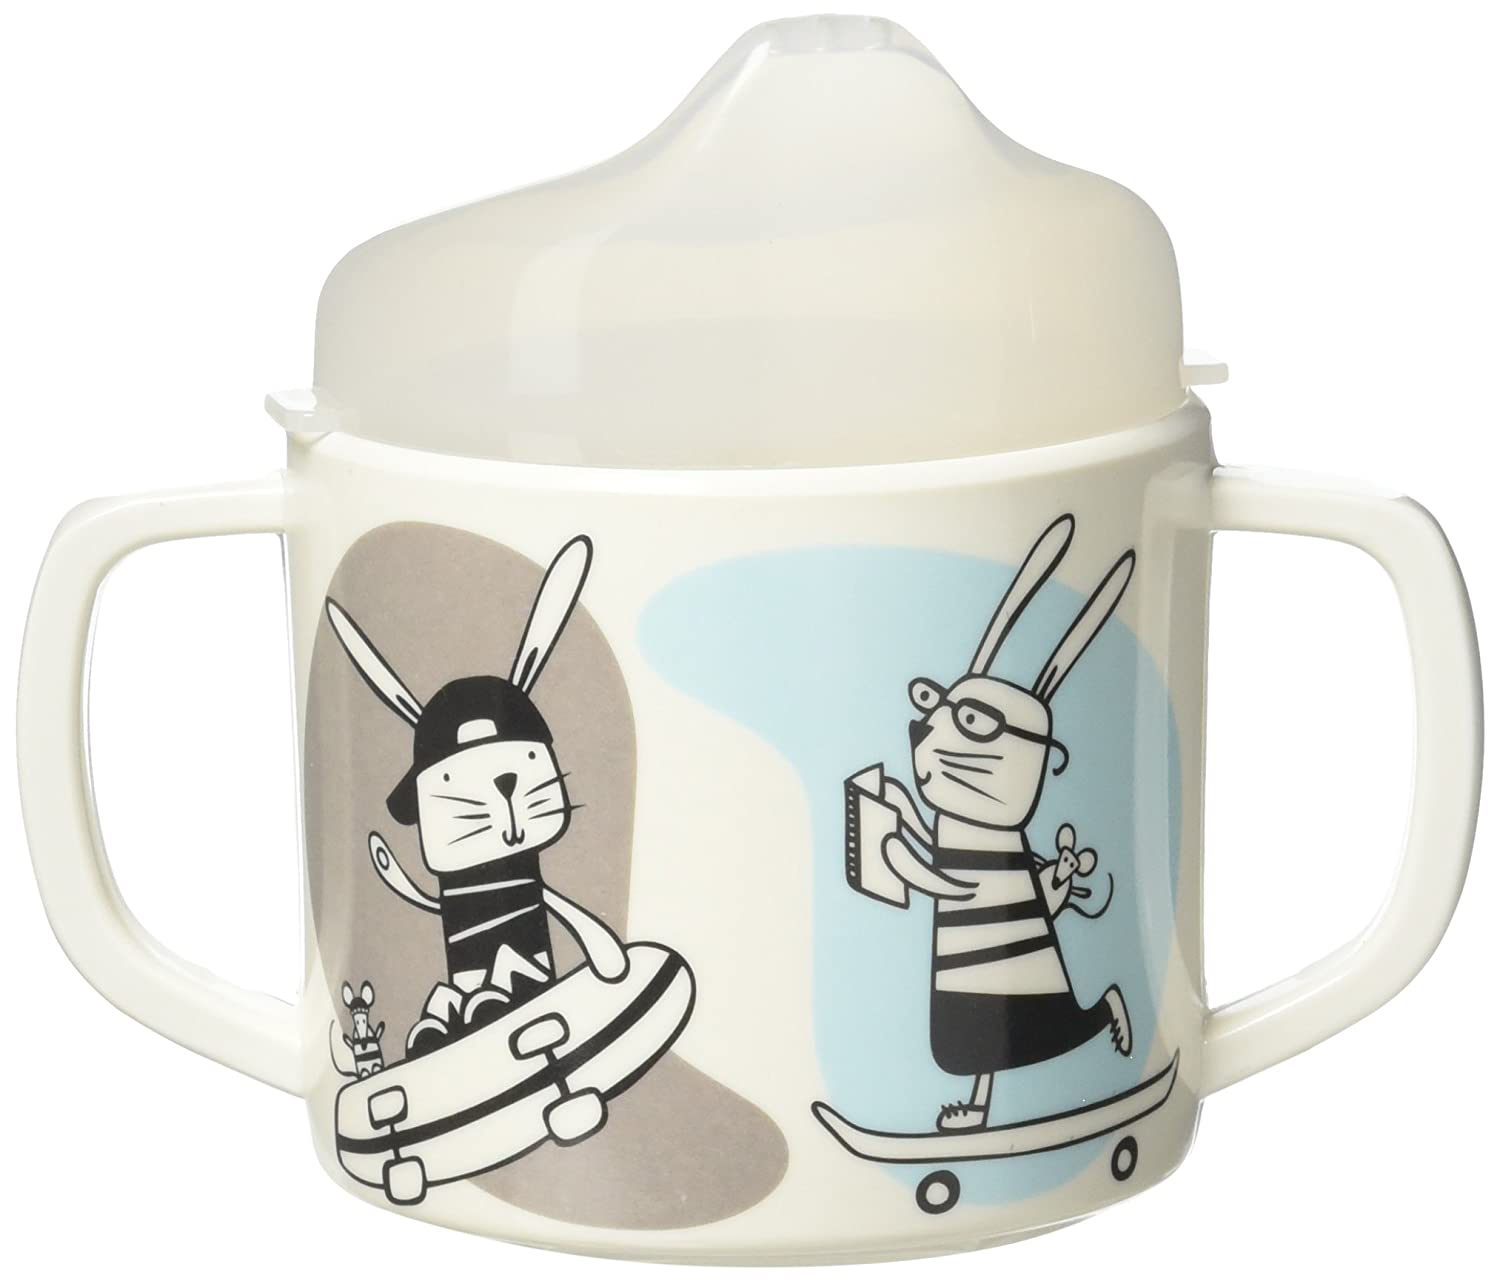 Ryder the Rabbit Sippy Cup 1